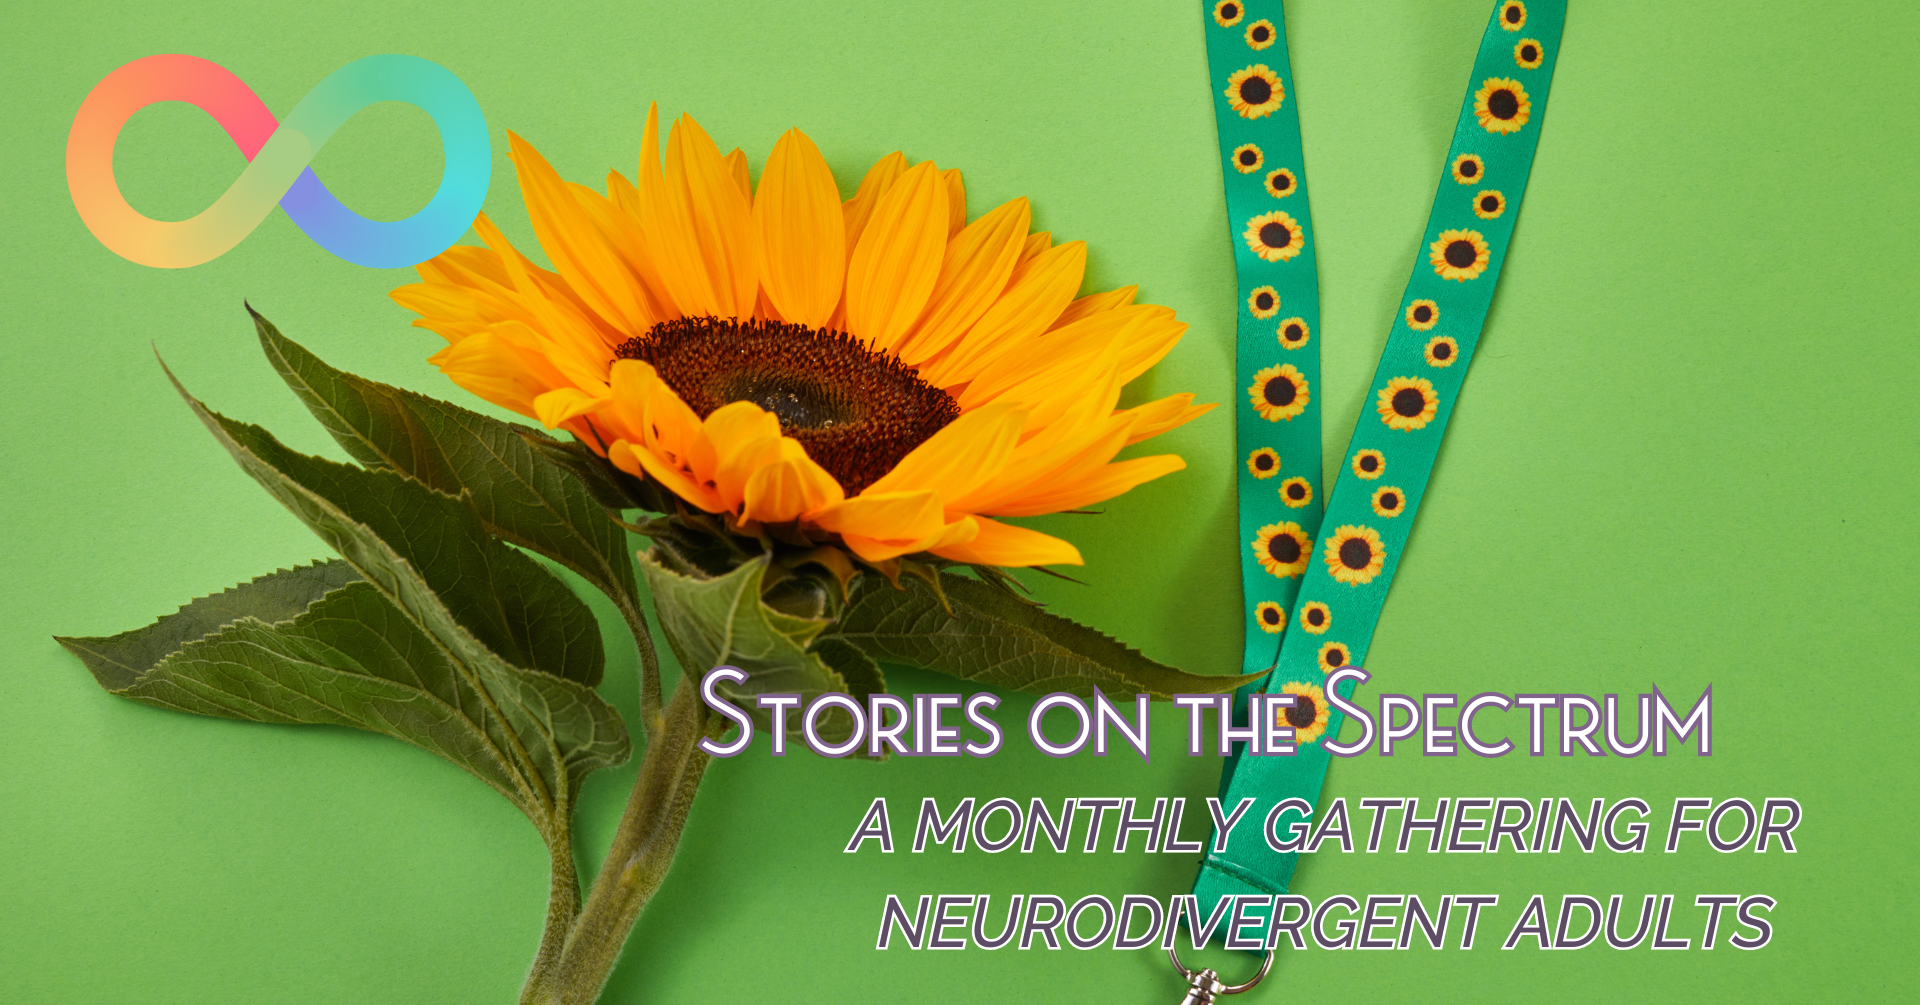 A sunflower and medium-green sunflower lanyard are positioned over a light green background.  In the upper left corner is a rainbow infinity symbol, and in the lower right corner are the words: "Stories on the Spectrum:  A Monthly Gathering for Neurodivergent Adults"